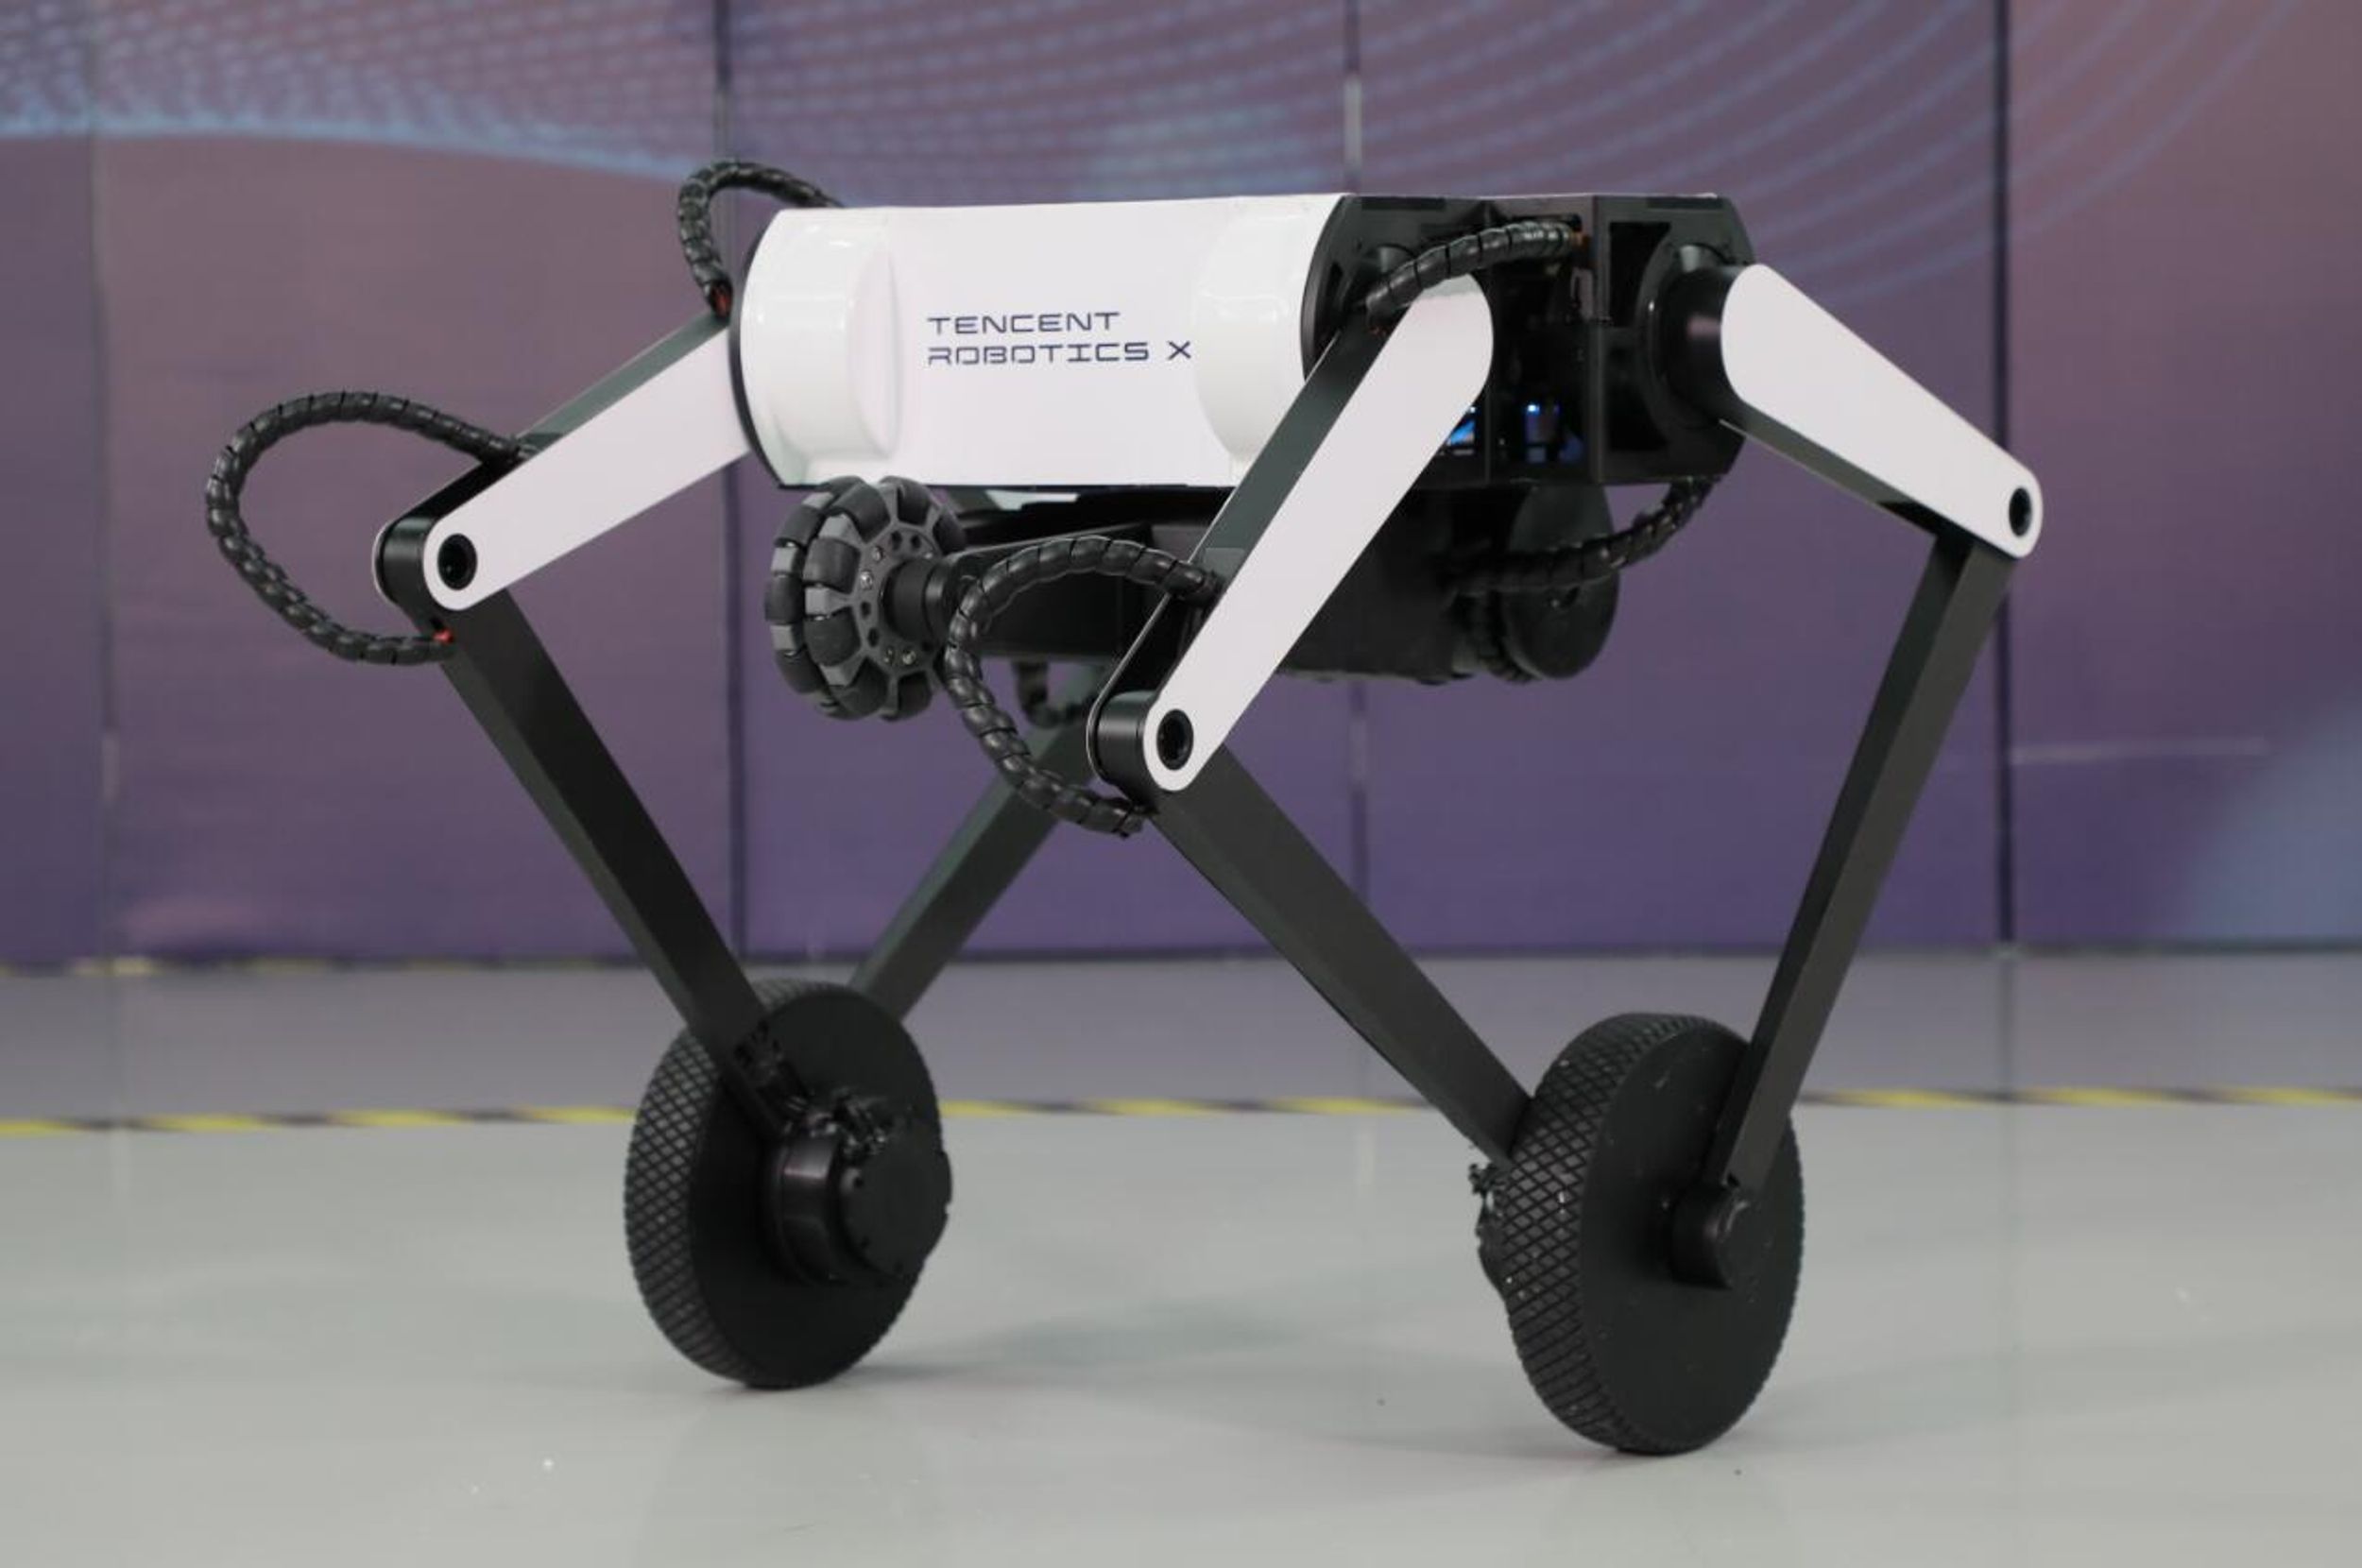 A black and white robot with four legs: each pair of legs is joined by an axle supporting a wheel. A wheeled tail is tucked up under the body.